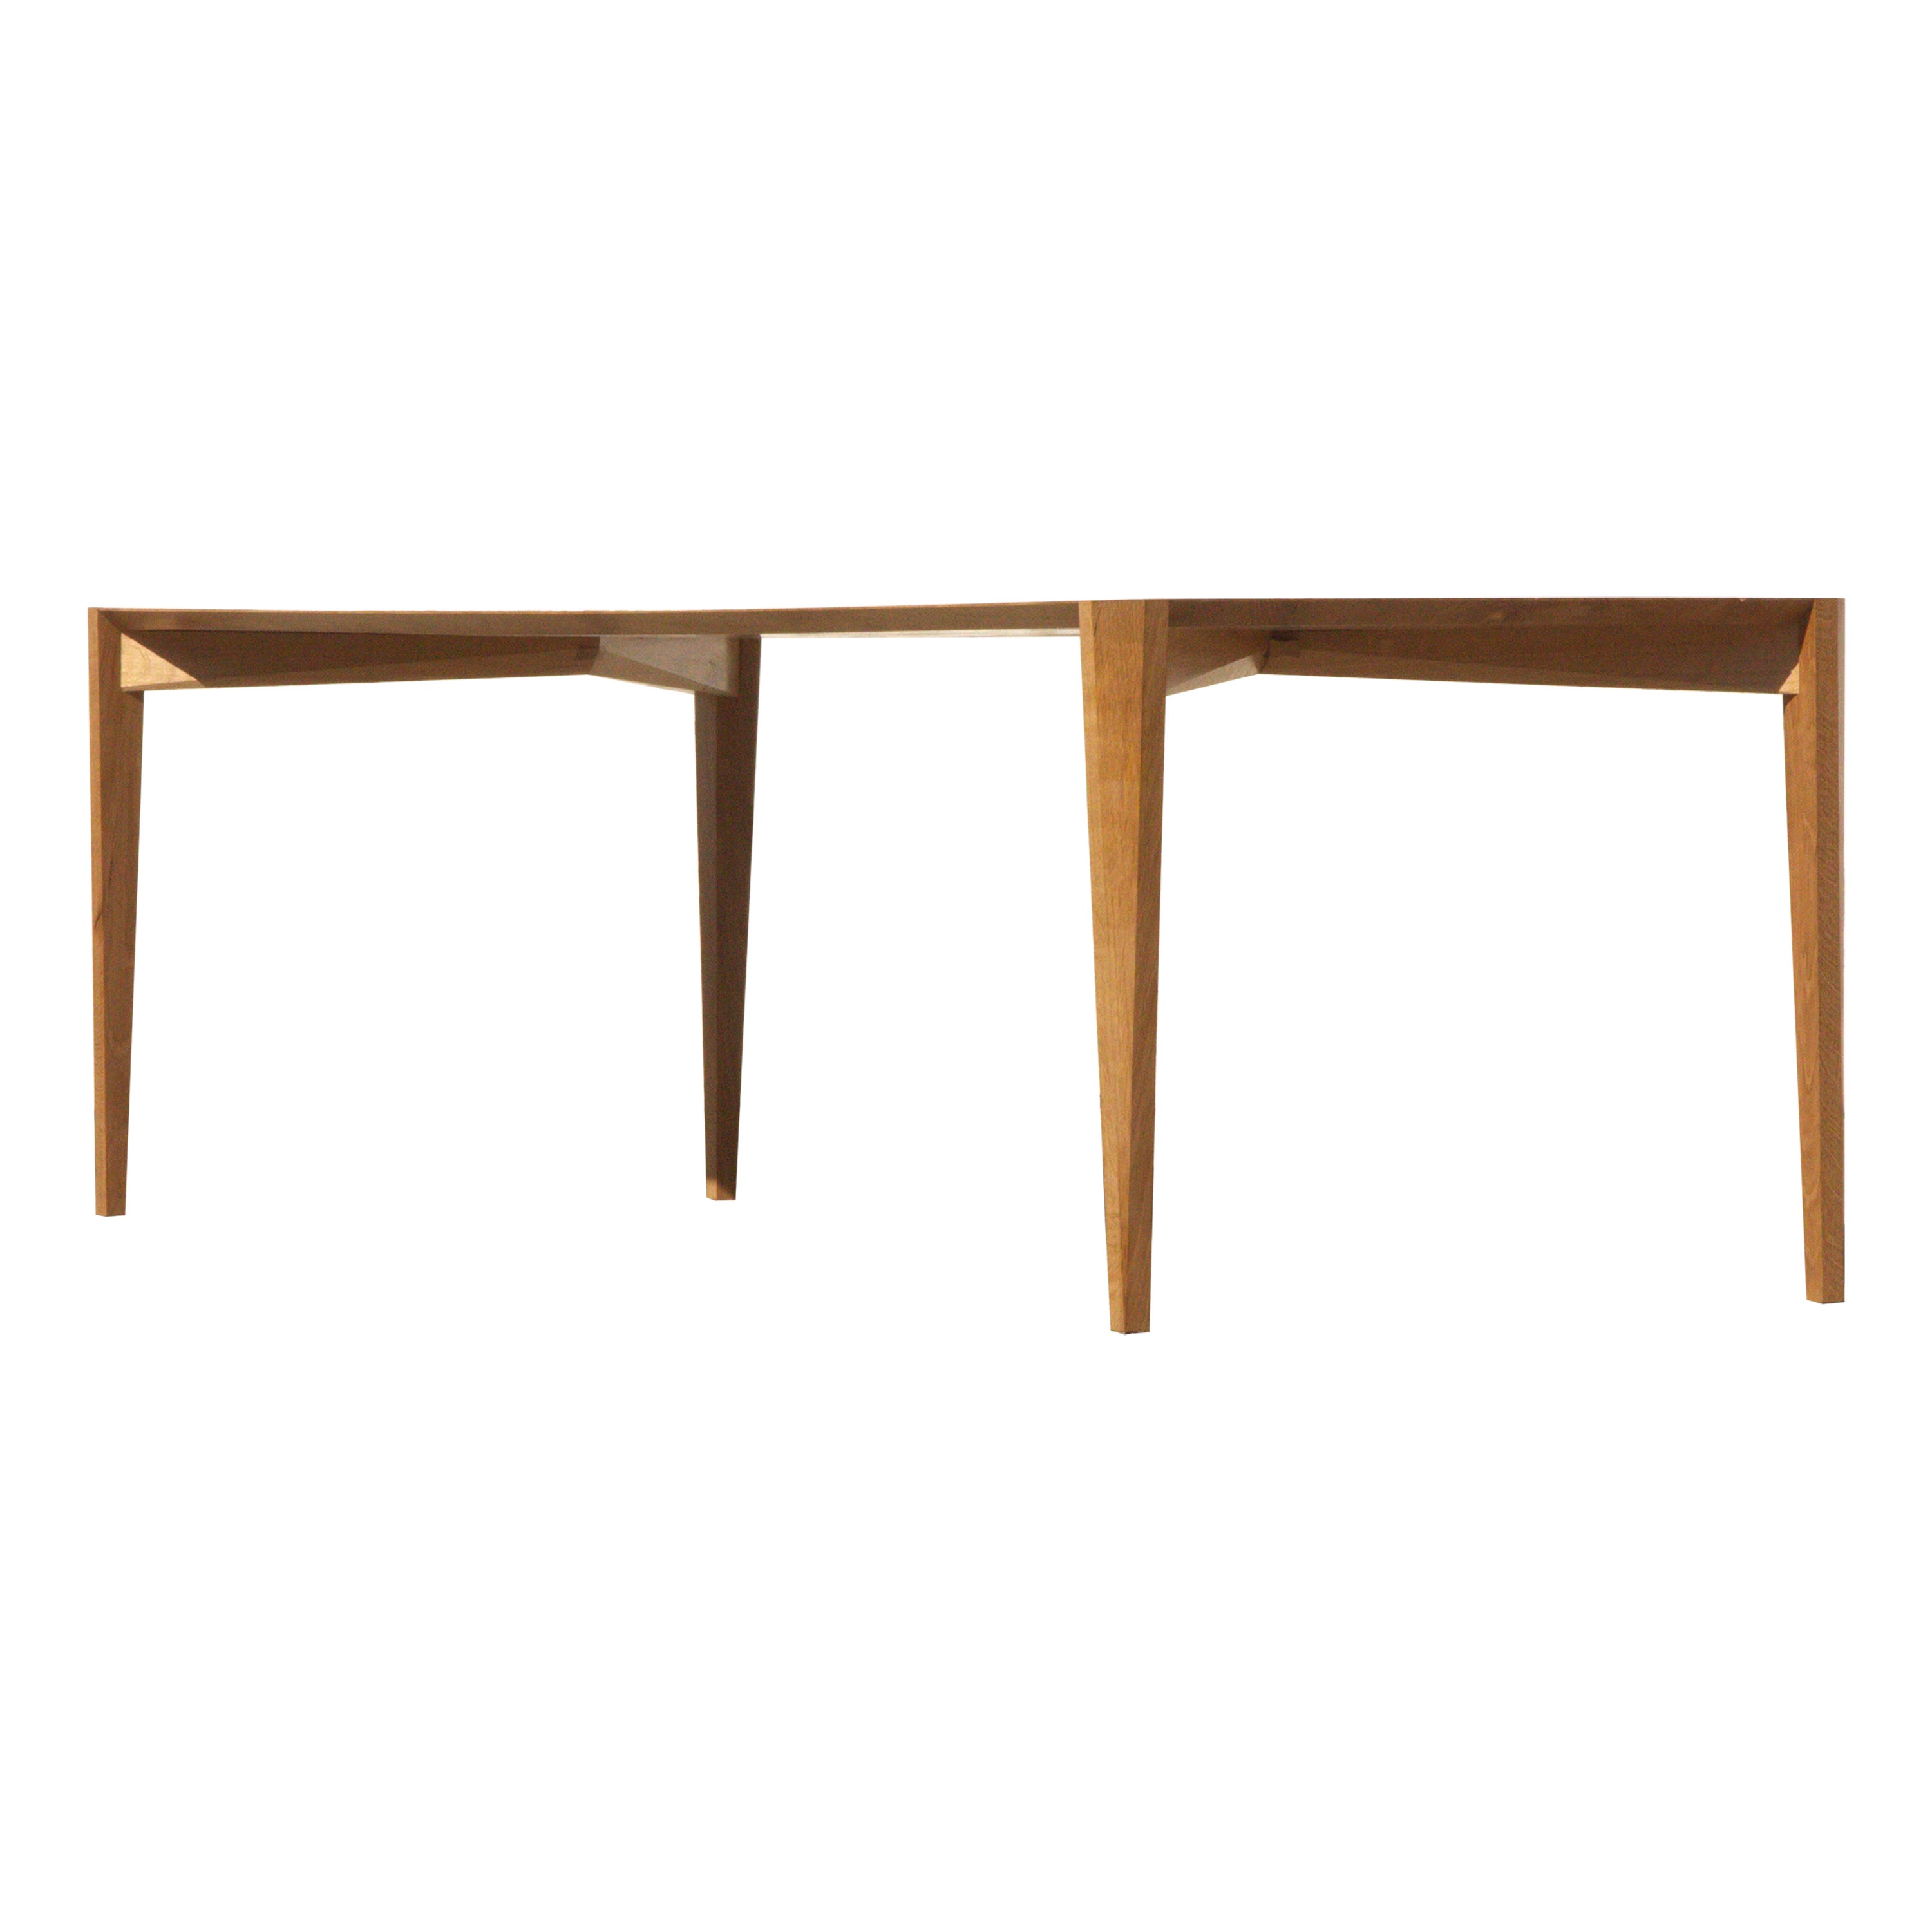 Mar Dining Table, a Sculptural and Modern Light Solid Oak Table by Tomaz Viana For Sale